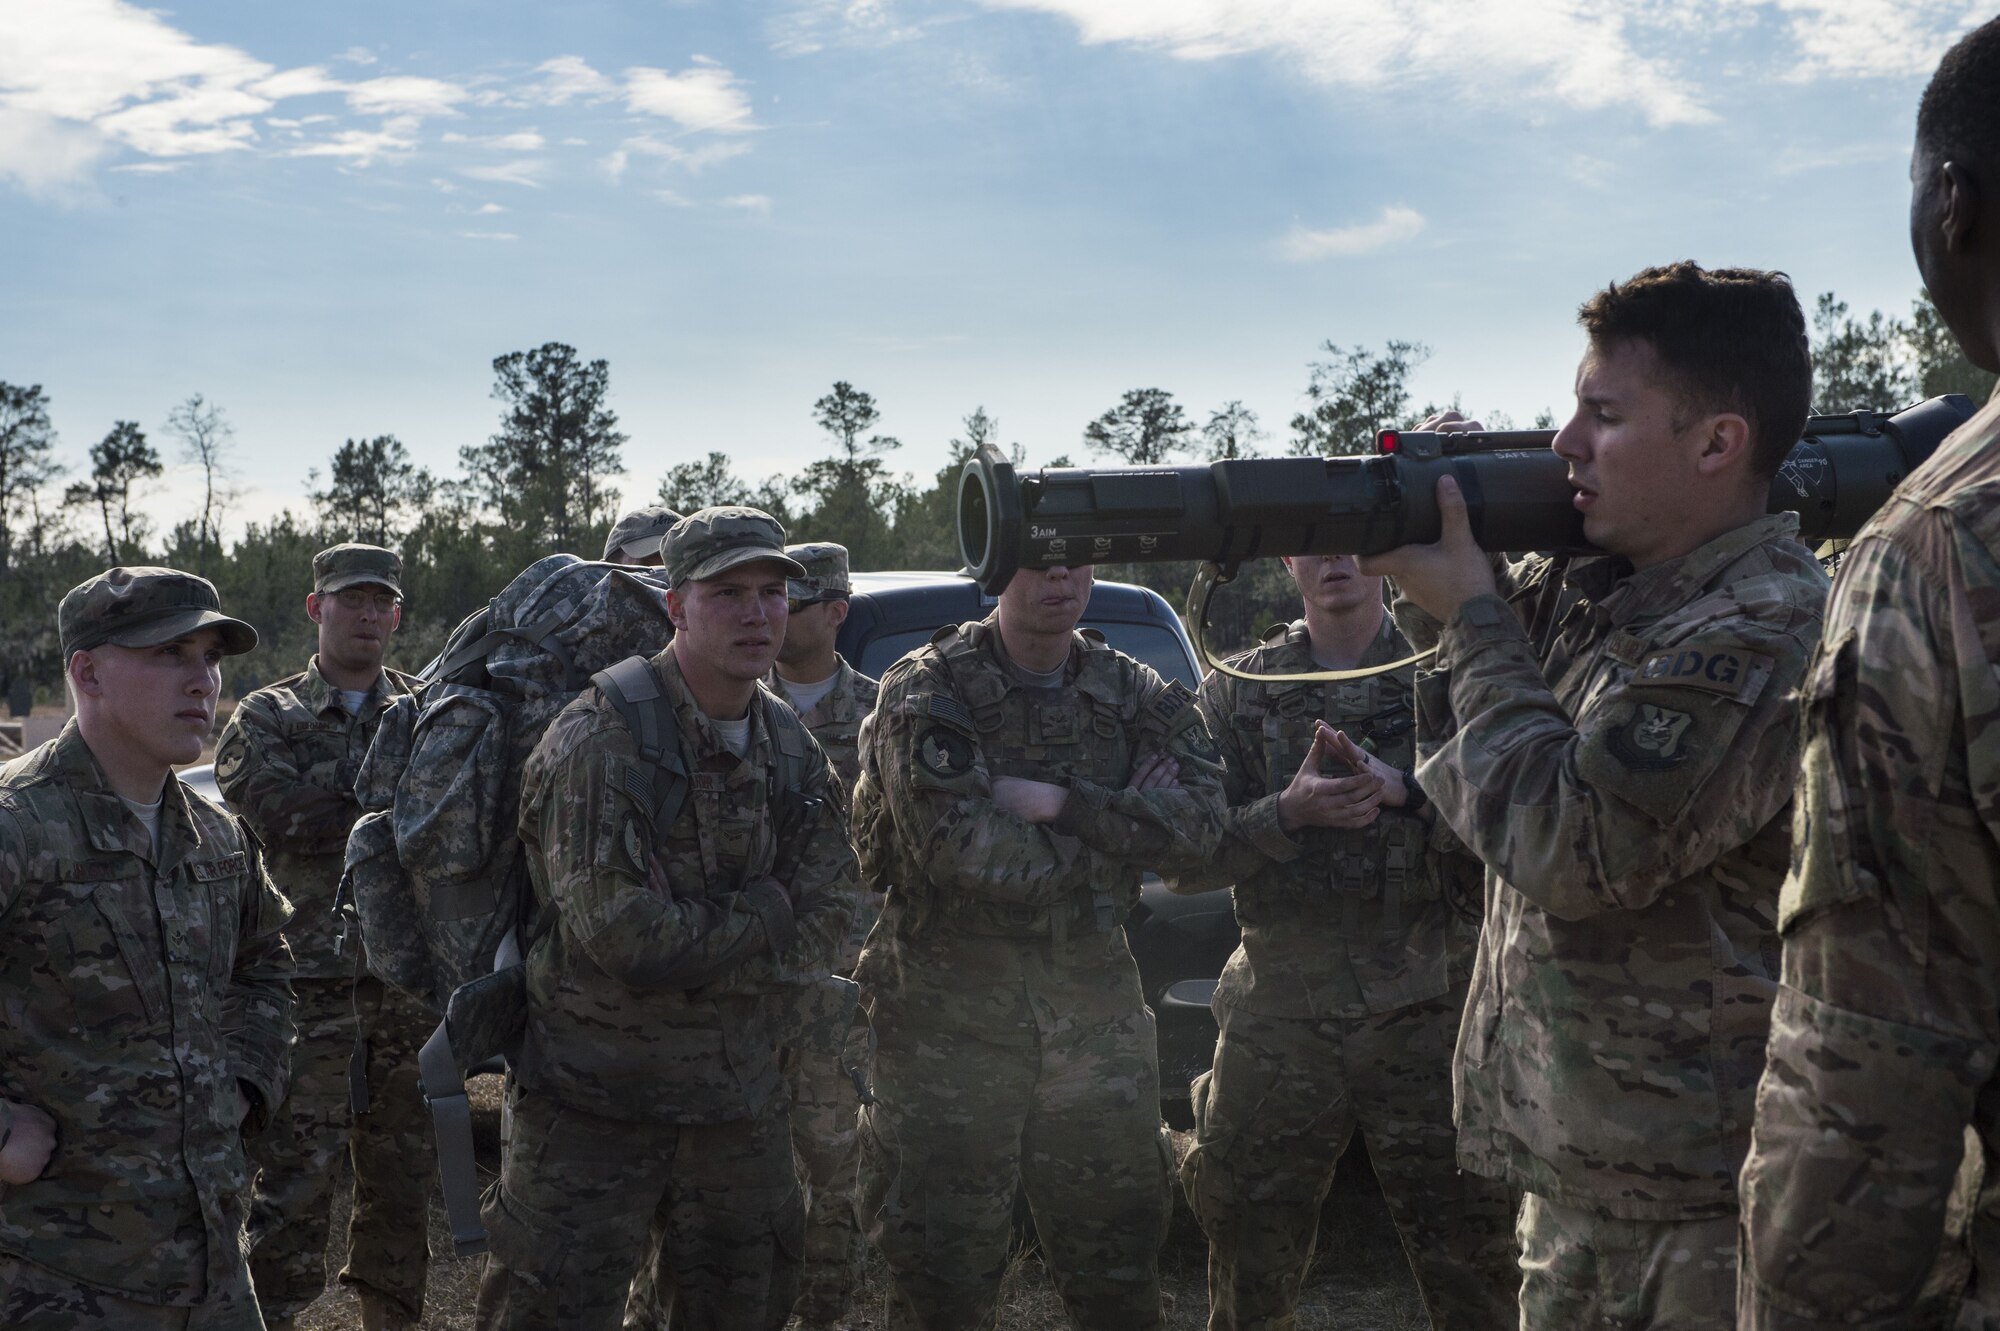 Staff Sgt. Nicholas Diamond, 820th combat operations squadron combat arms training and maintenance instructor, instructs Airmen on the firing procedures for an M136E1 AT4-CS confined space  light anti-armor weapon, Jan. 24, 2018, at Camp Blanding Joint Training Center, Fla. During Weapons Week, Airmen qualify on heavy weapons to include the M2 machine gun, Mark 19 40mm grenade machine gun, M240B machine gun, M249 light machine gun, M136E1 AT4-CS confined space light anti-armor weapon, and M18 Claymore mine. (U.S. Air Force photo by Senior Airman Janiqua P. Robinson)